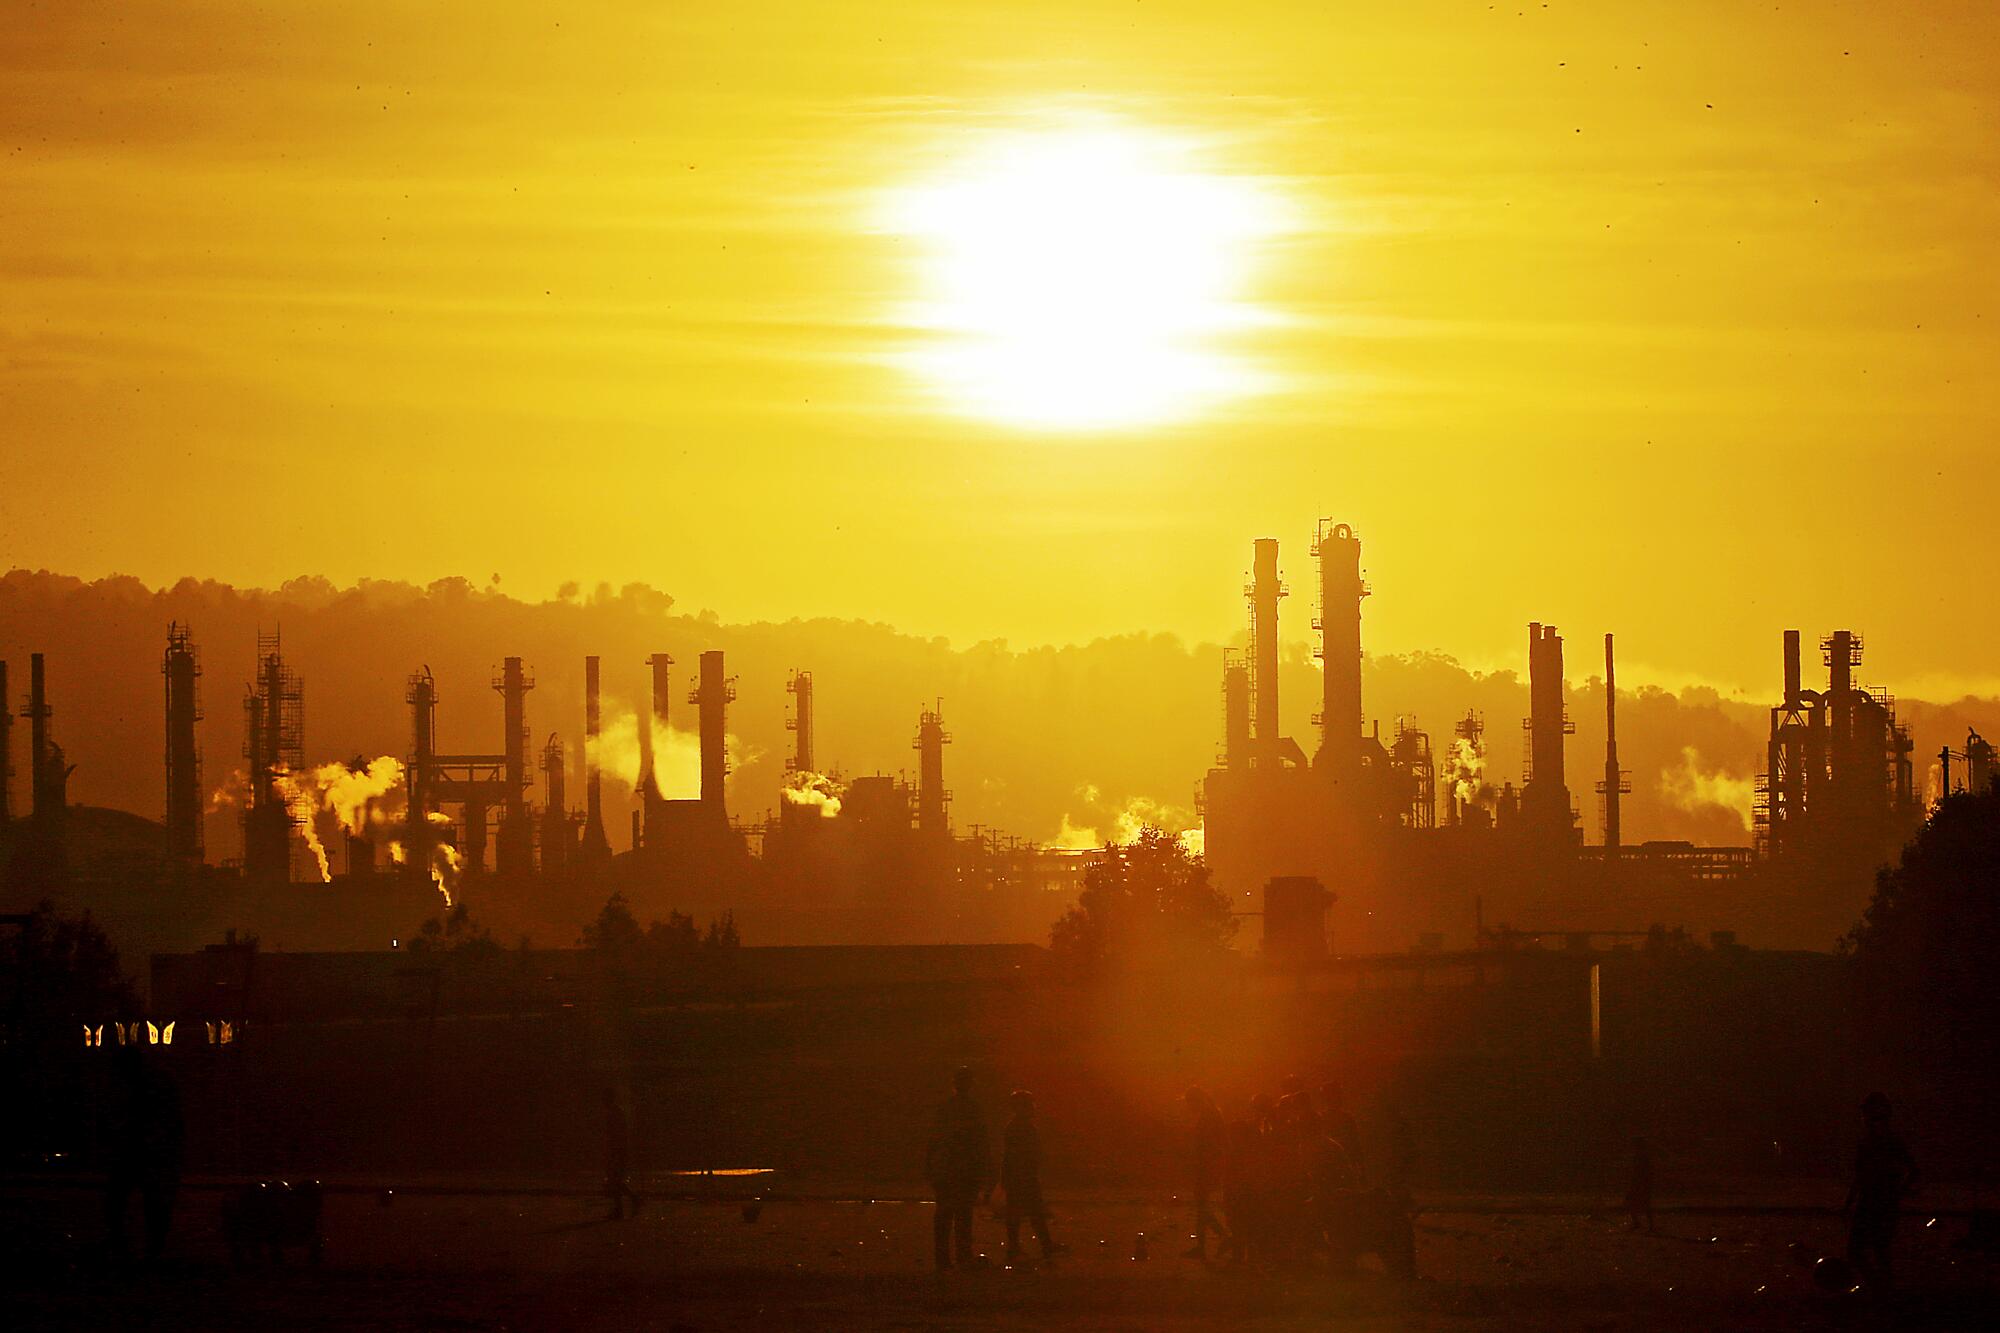 Yellow-orange haze hangs over youth soccer fields and an oil refinery in Wilmington, near the Port of Los Angeles